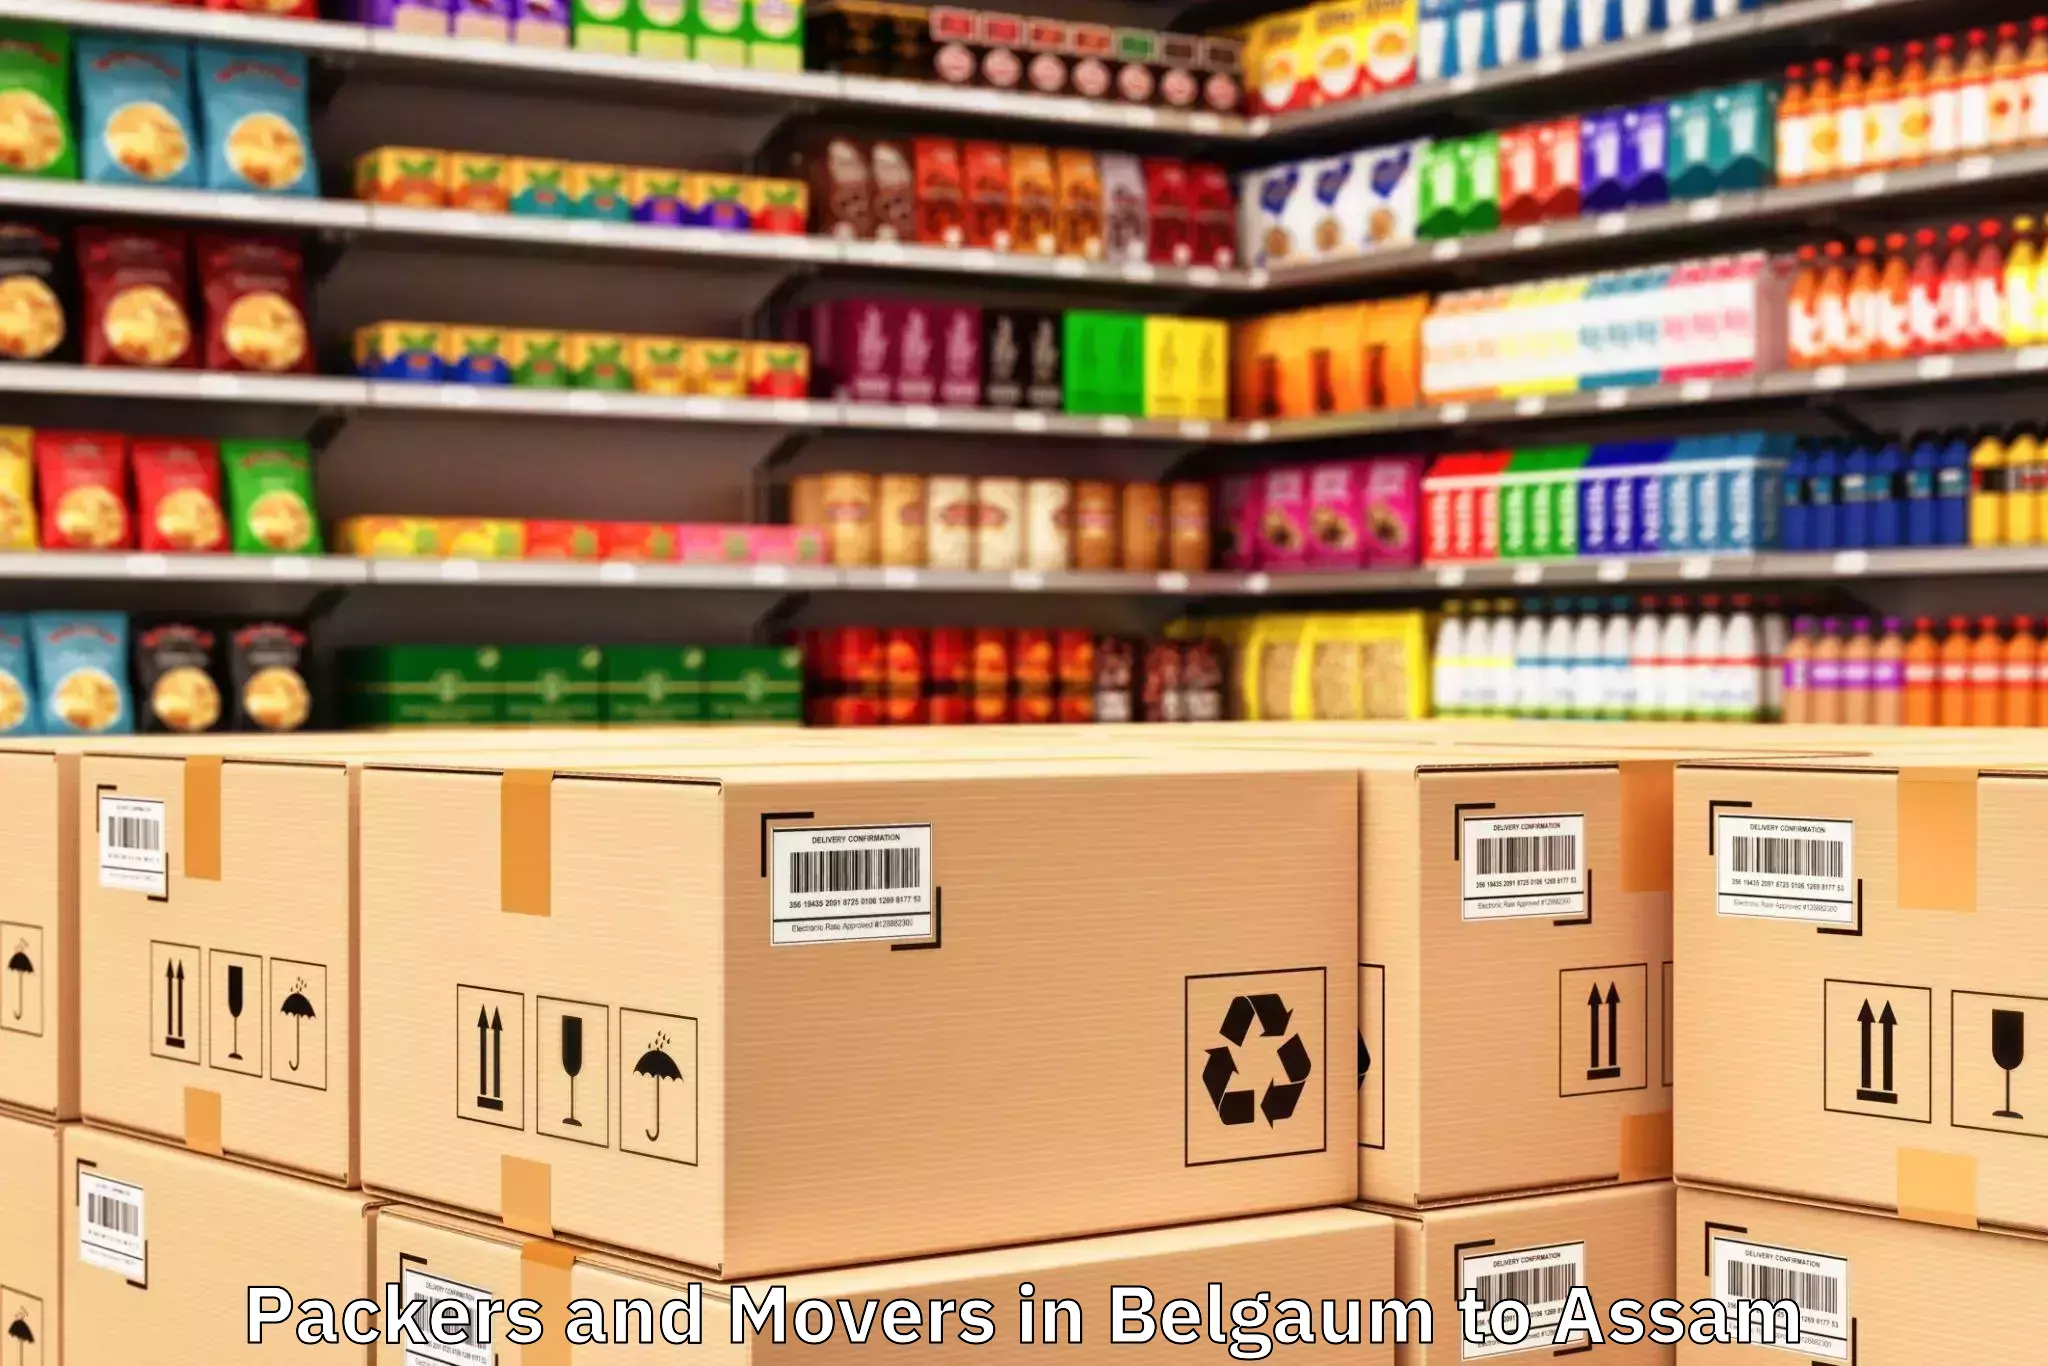 Belgaum to Assam Packers And Movers Booking